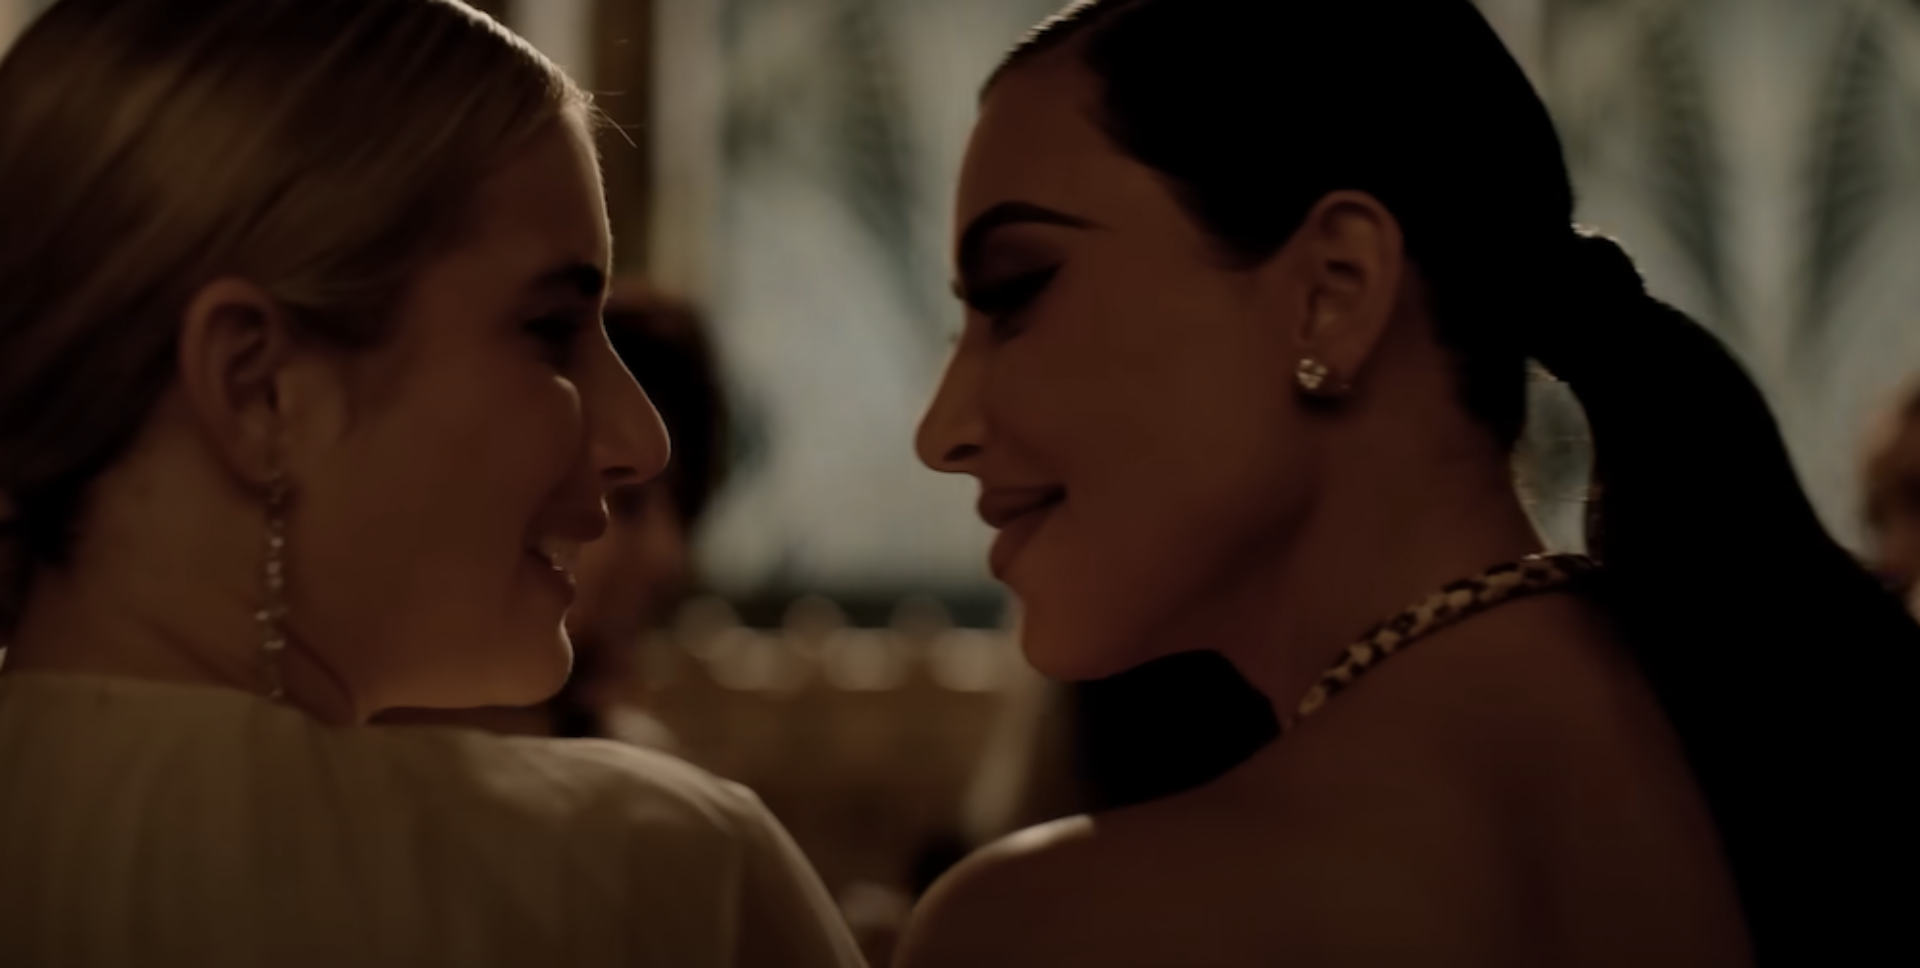 The trailer for American Horror Story: Delicate Part 2, starring Kim Kardashian and Emma Roberts, was released on March 20 after the season was forced to take a six-month pause.